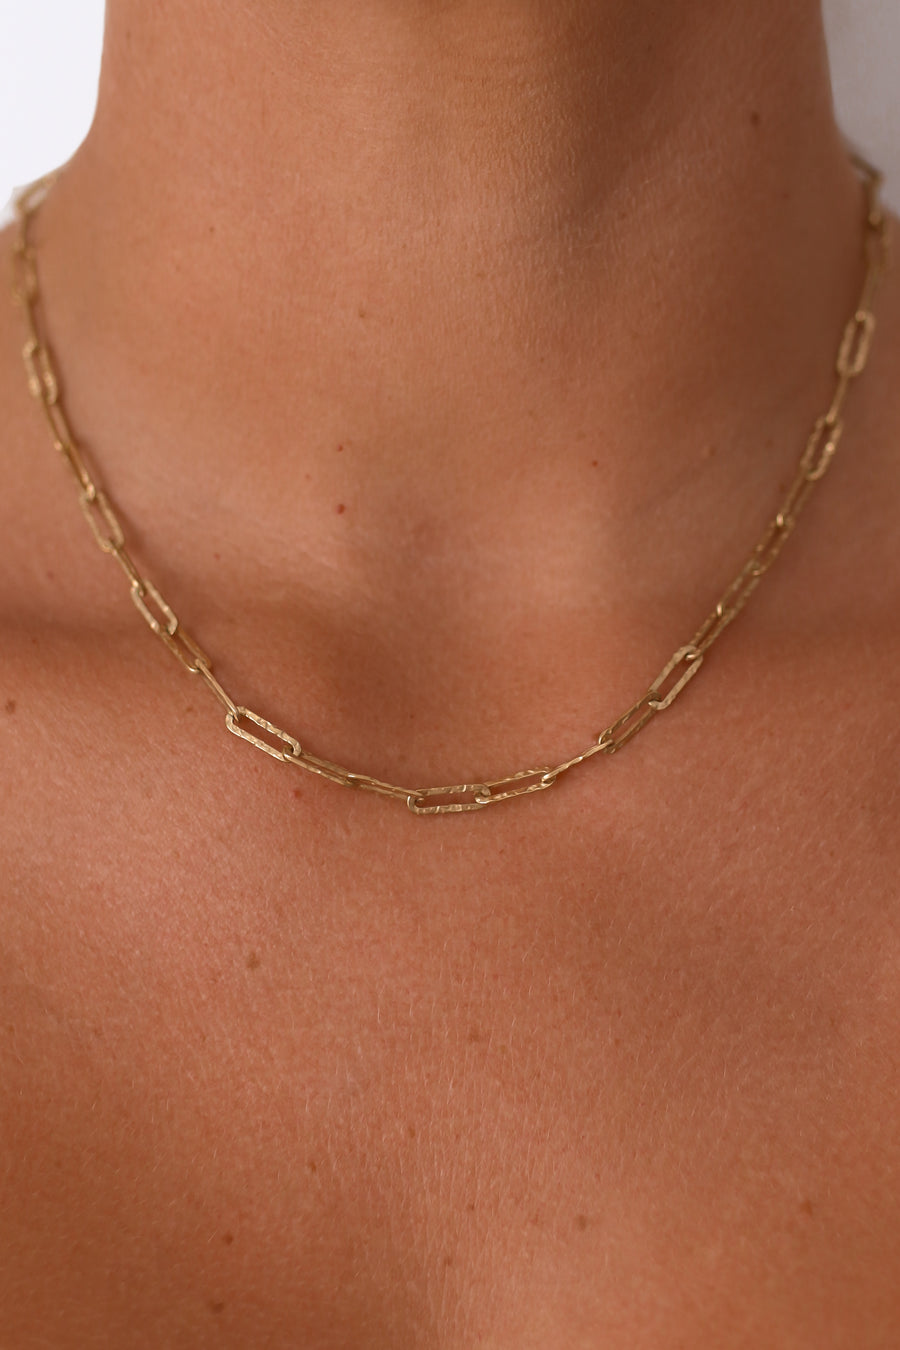 Danielle - Stainless Steel Gold or Silver Necklace